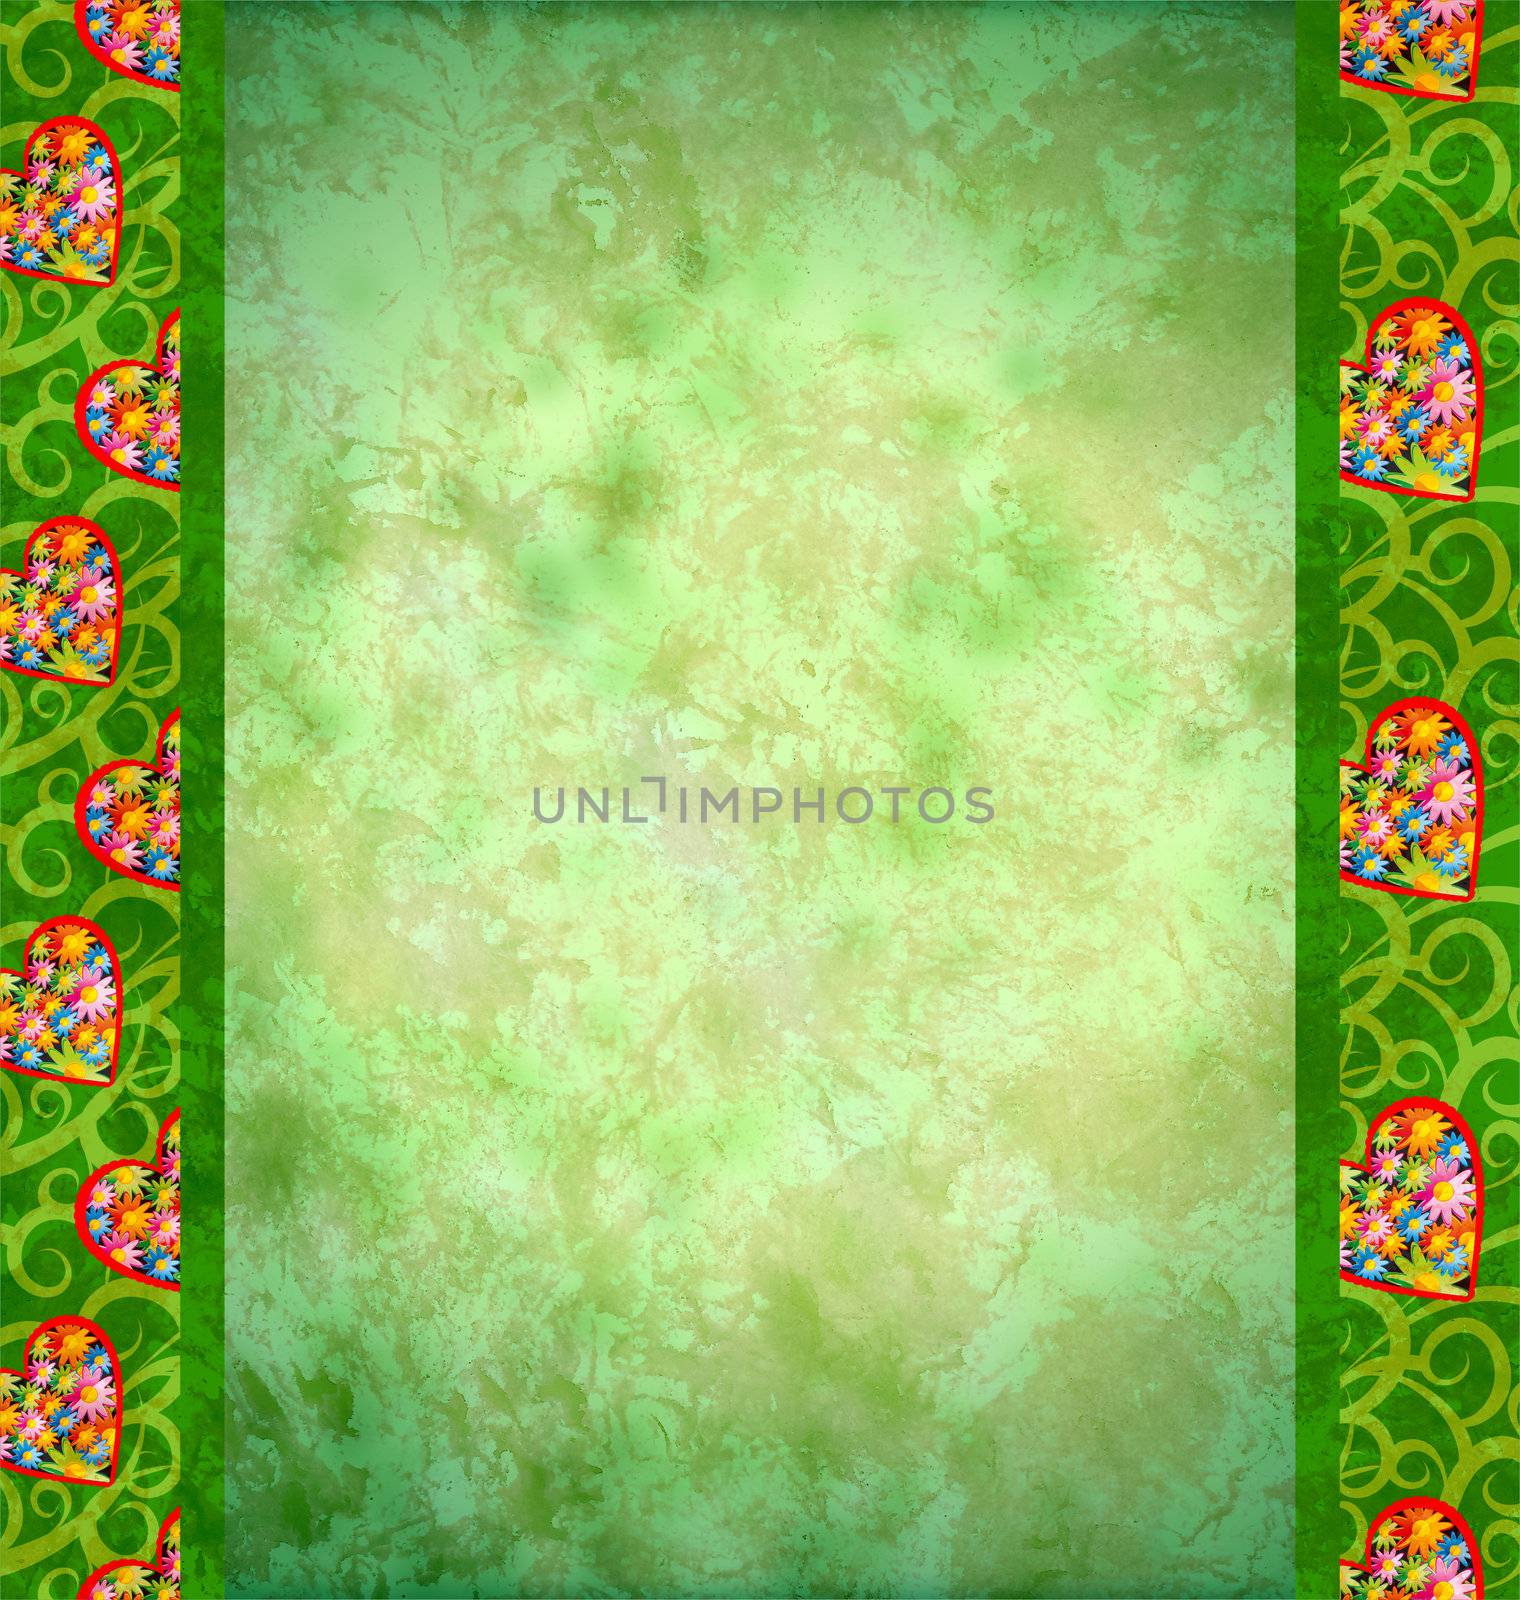 grunge green background with flowers hearts borders by CherJu